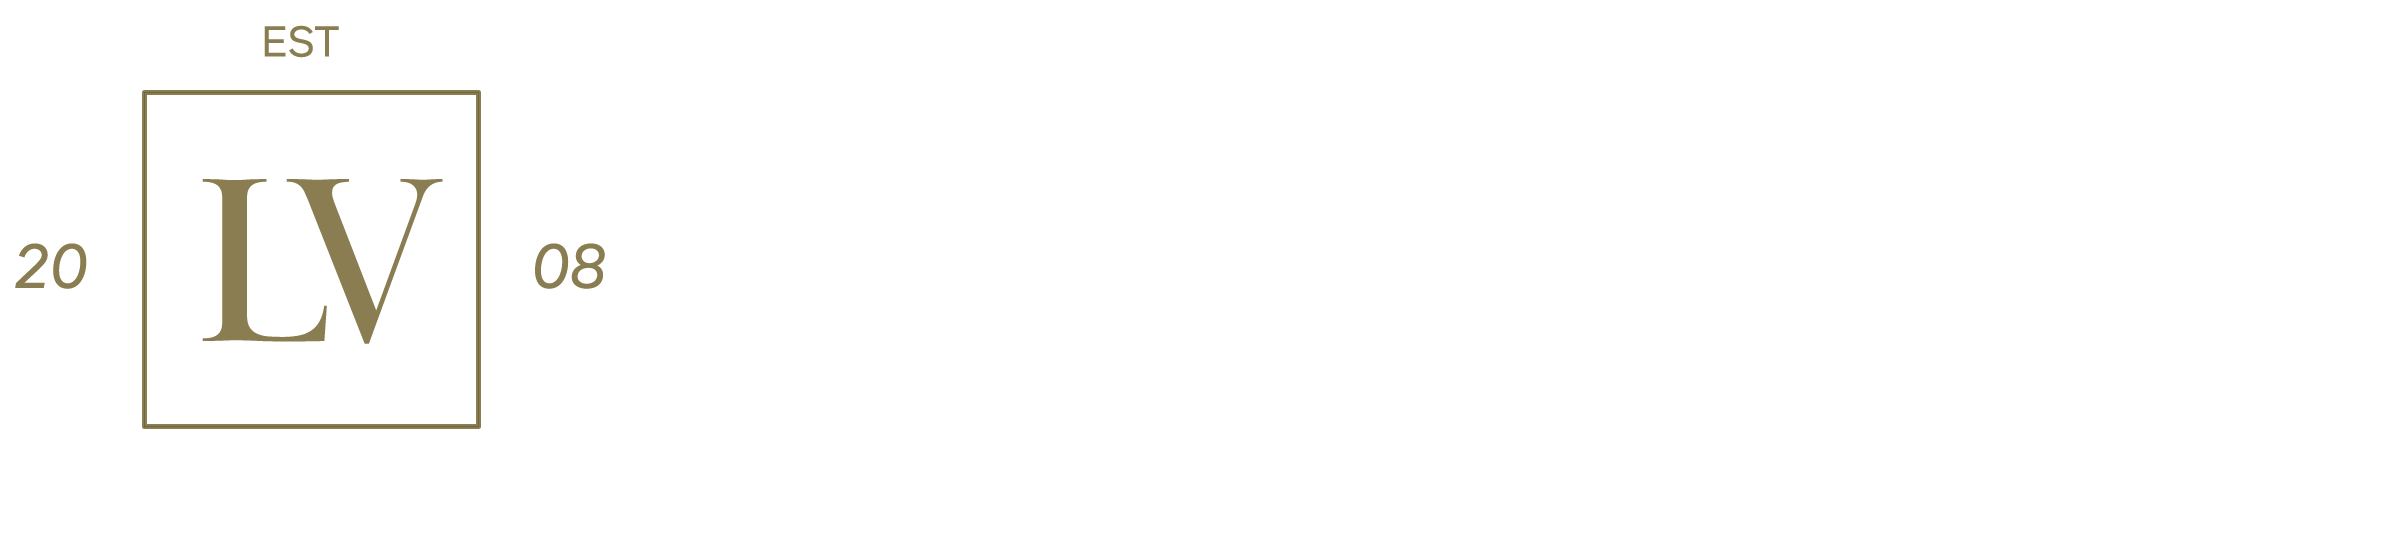 Law Offices of Luigi Vigliotti - Attorney at Law | Garden City, NY